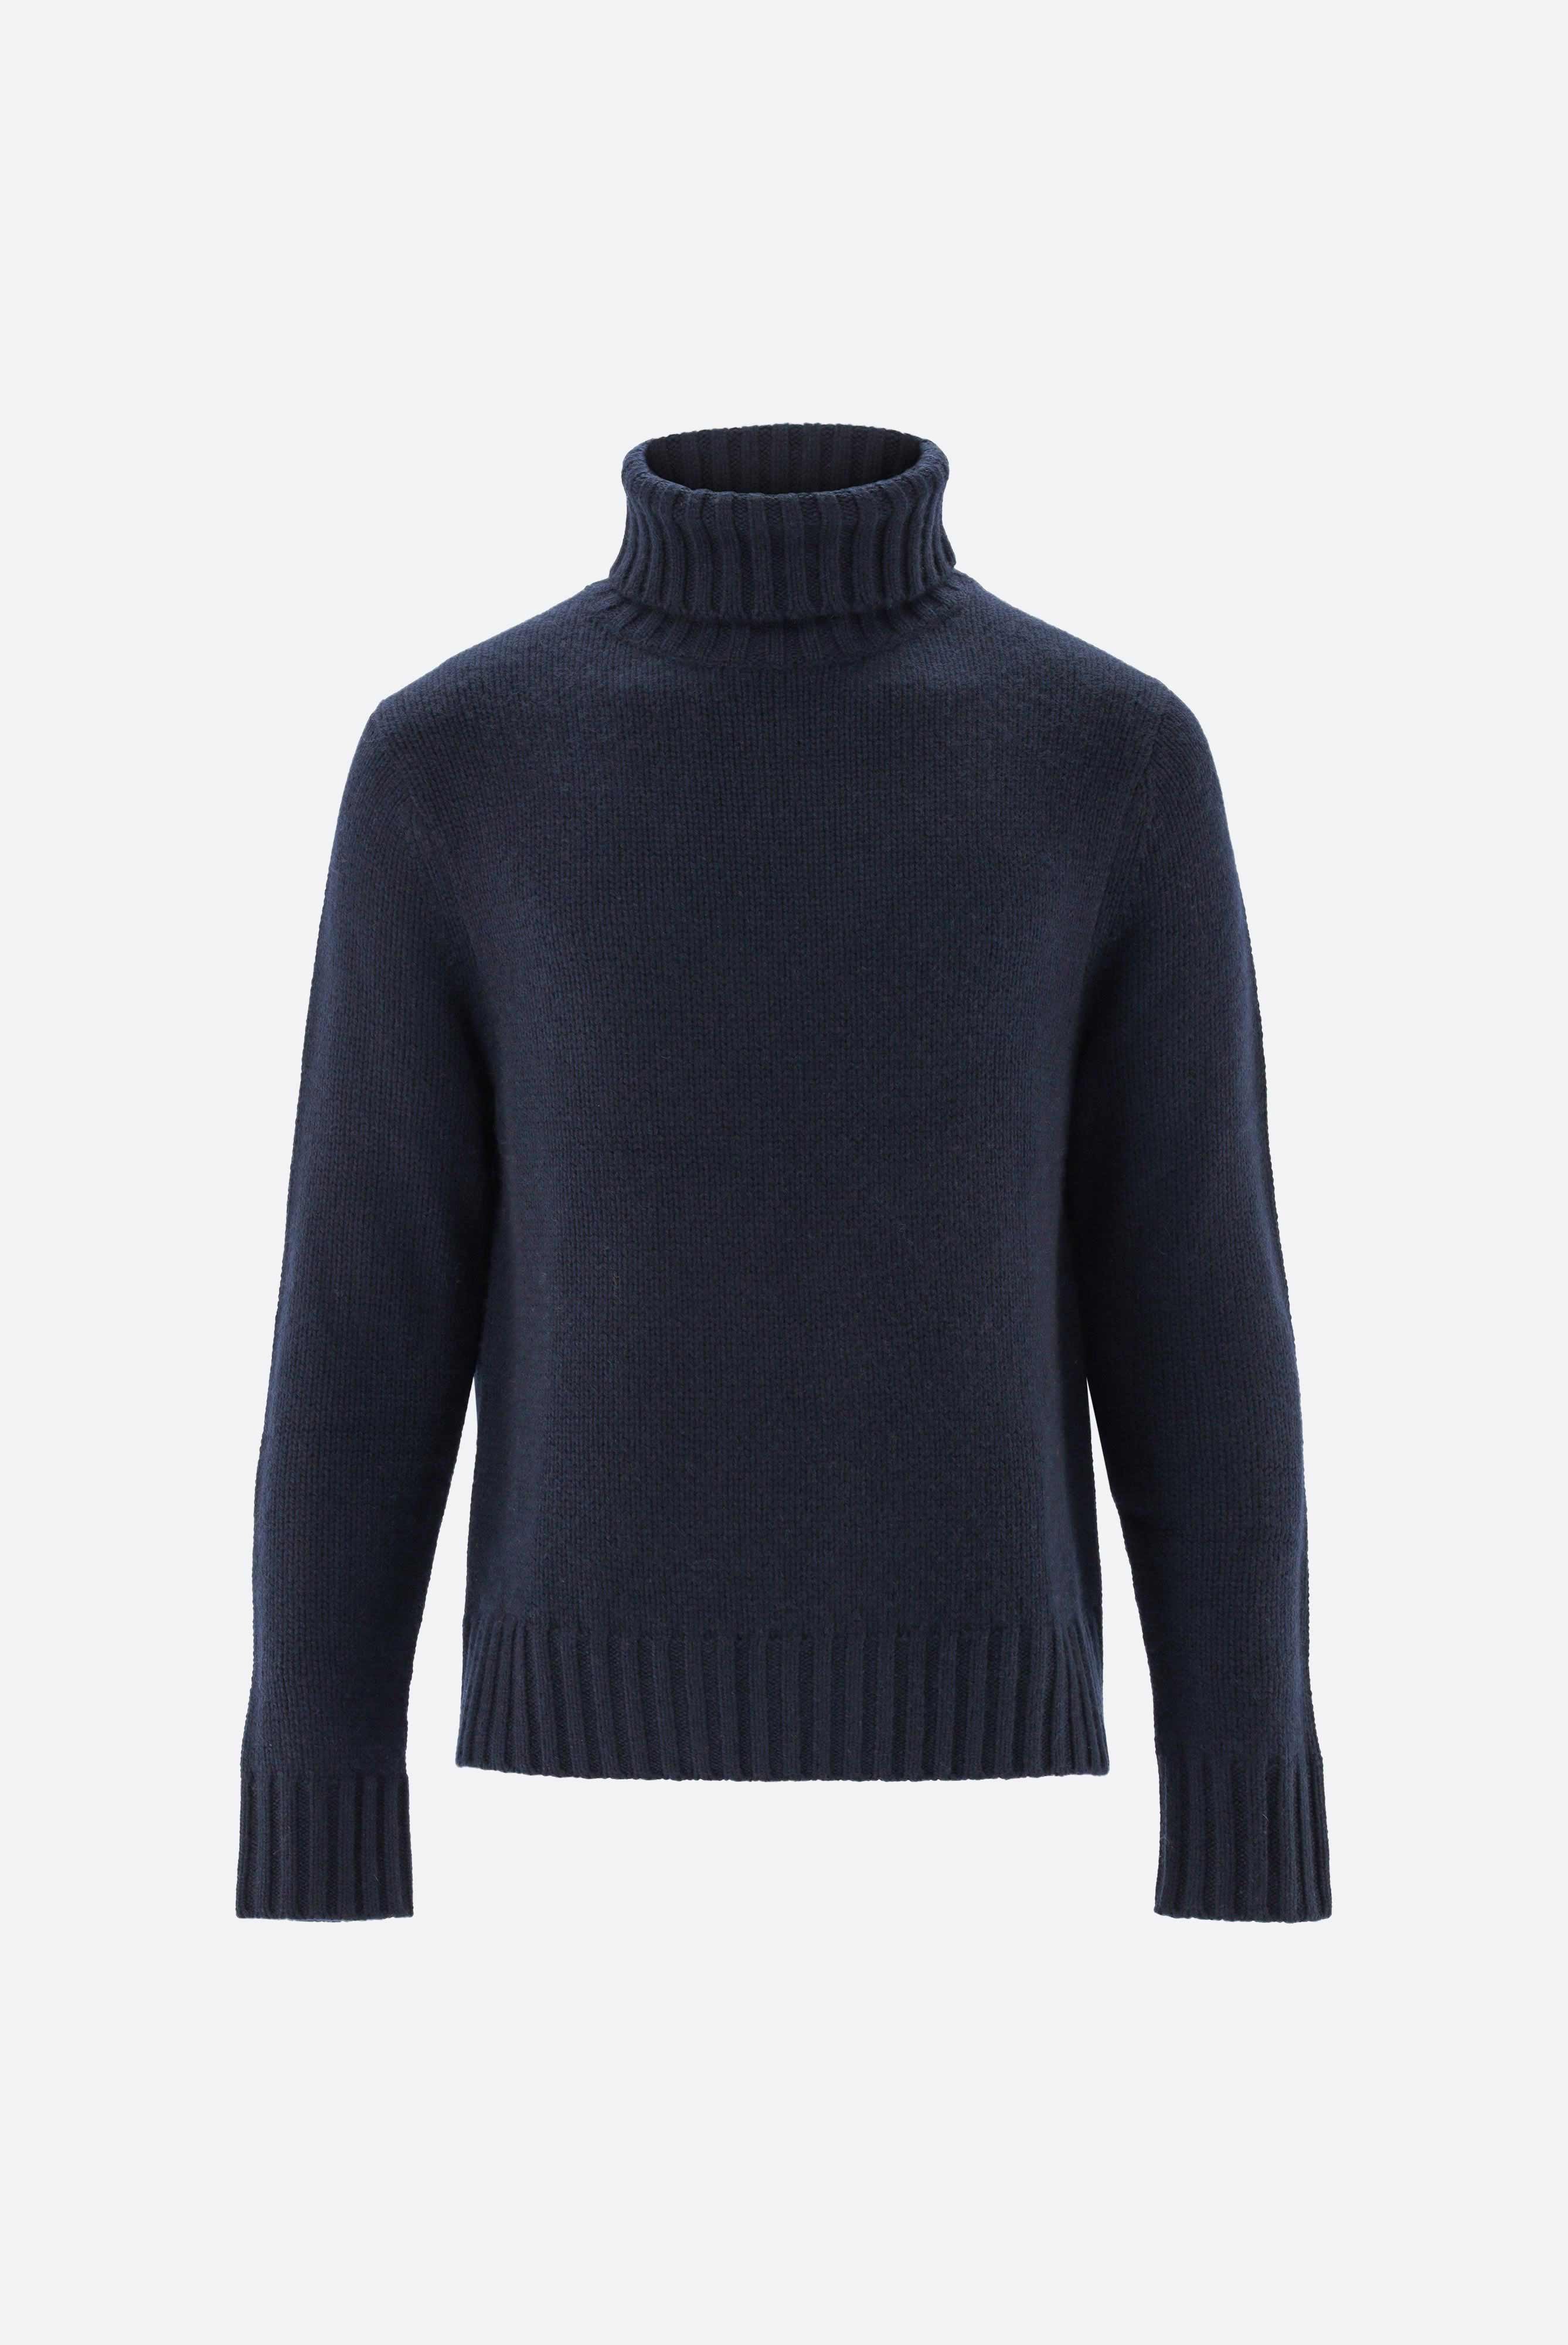 Sweaters & Cardigans+Turtleneck Cashmere Sweater+82.8640..S00235.790.S